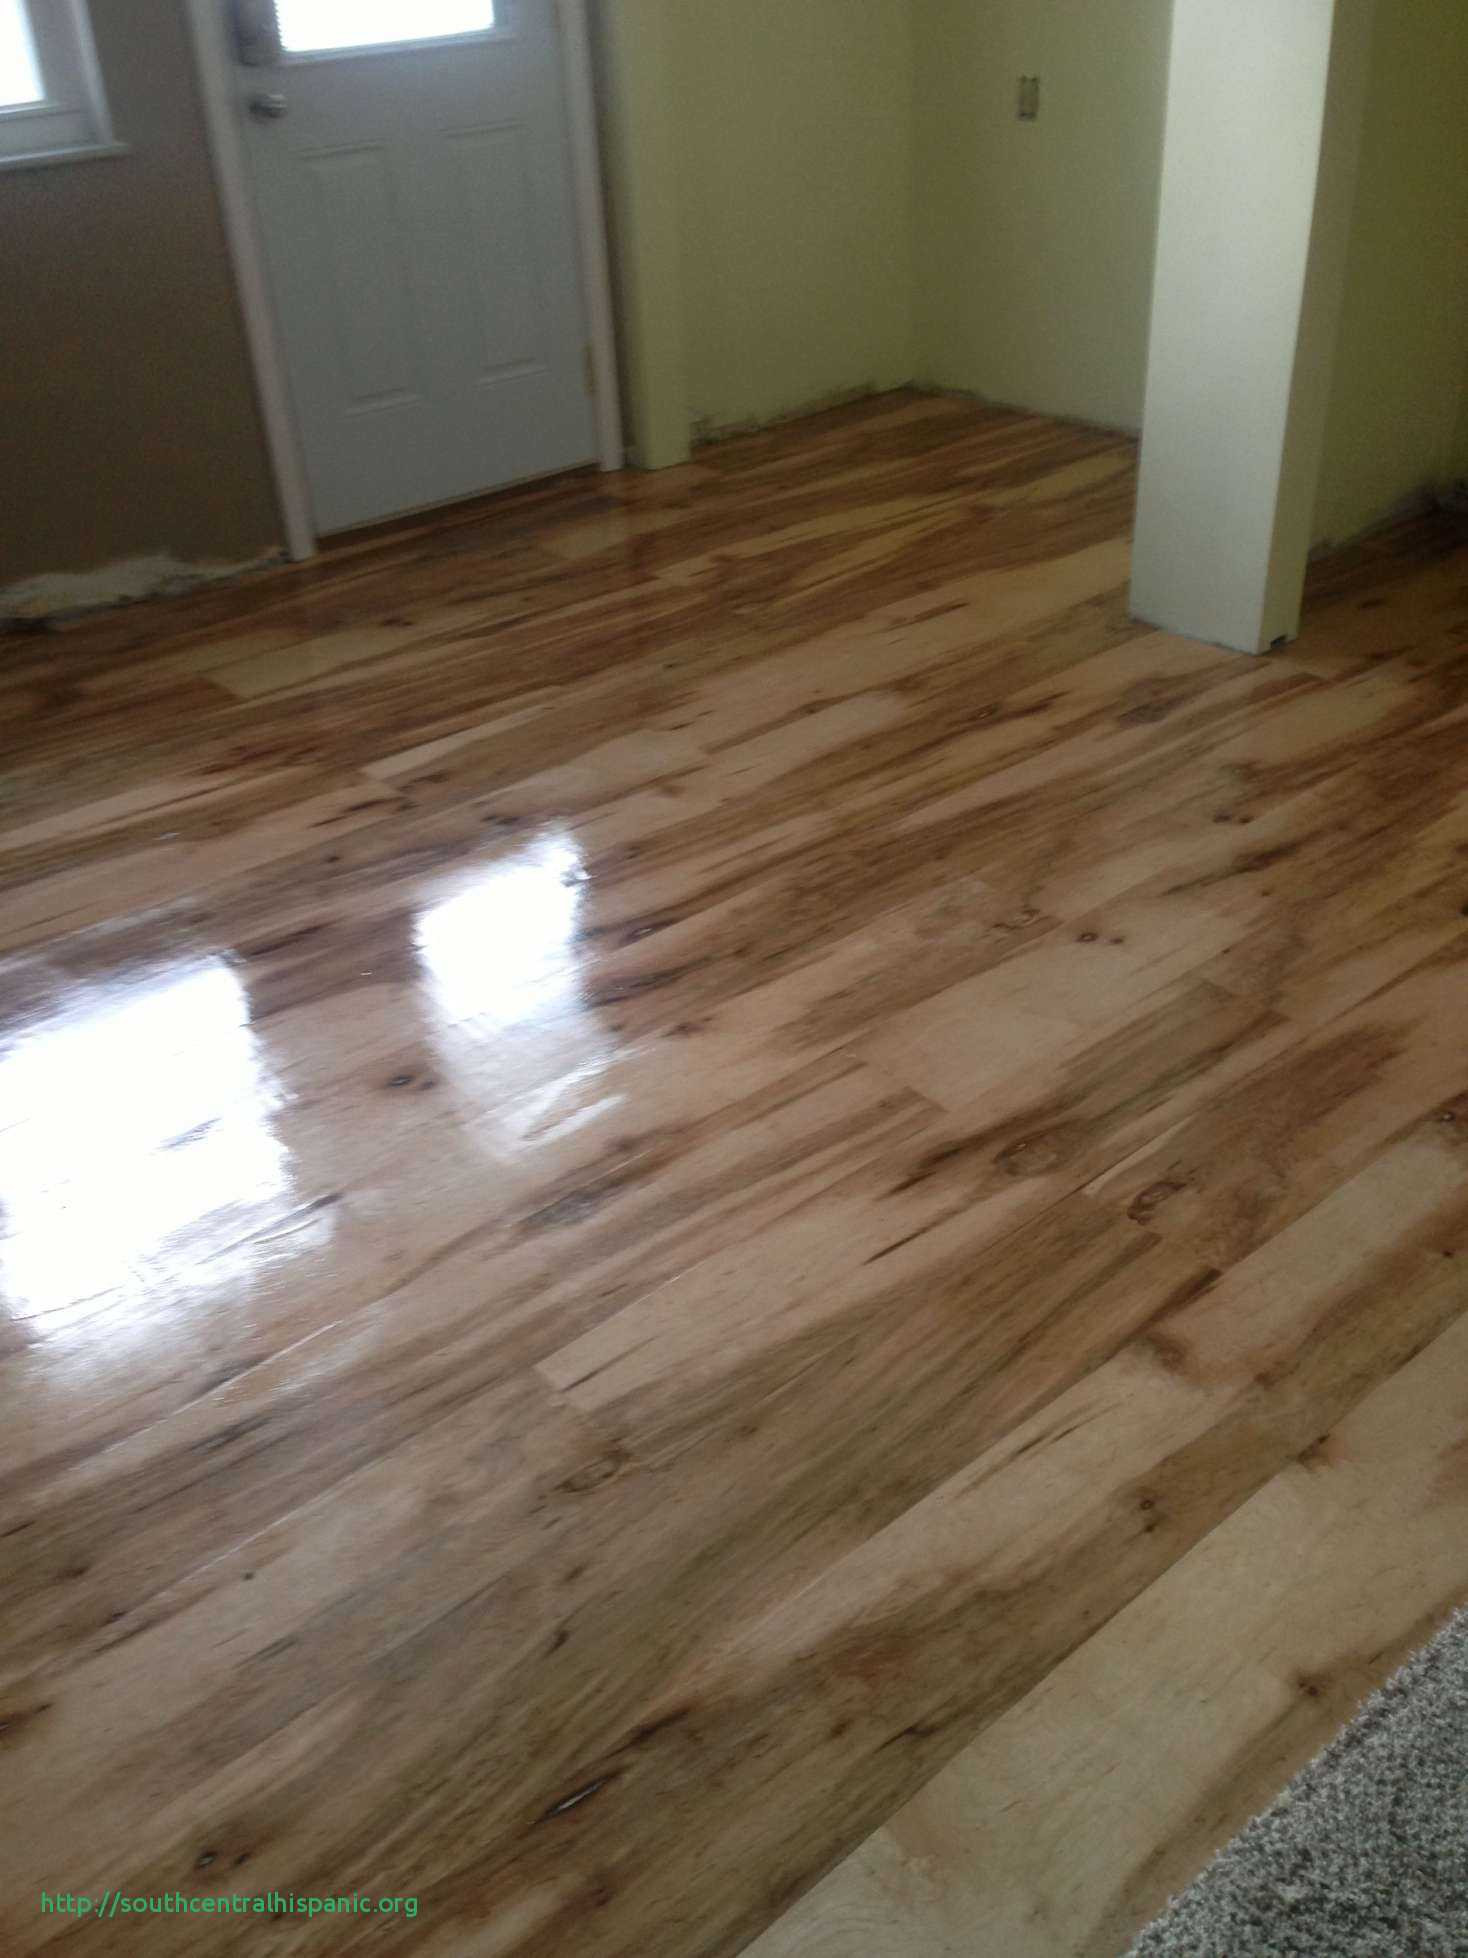 staining hardwood floors how to of 17 charmant how to clean garage floor stains ideas blog throughout engaging discount hardwood flooring 5 where to buy inspirational 0d for garage floor stain